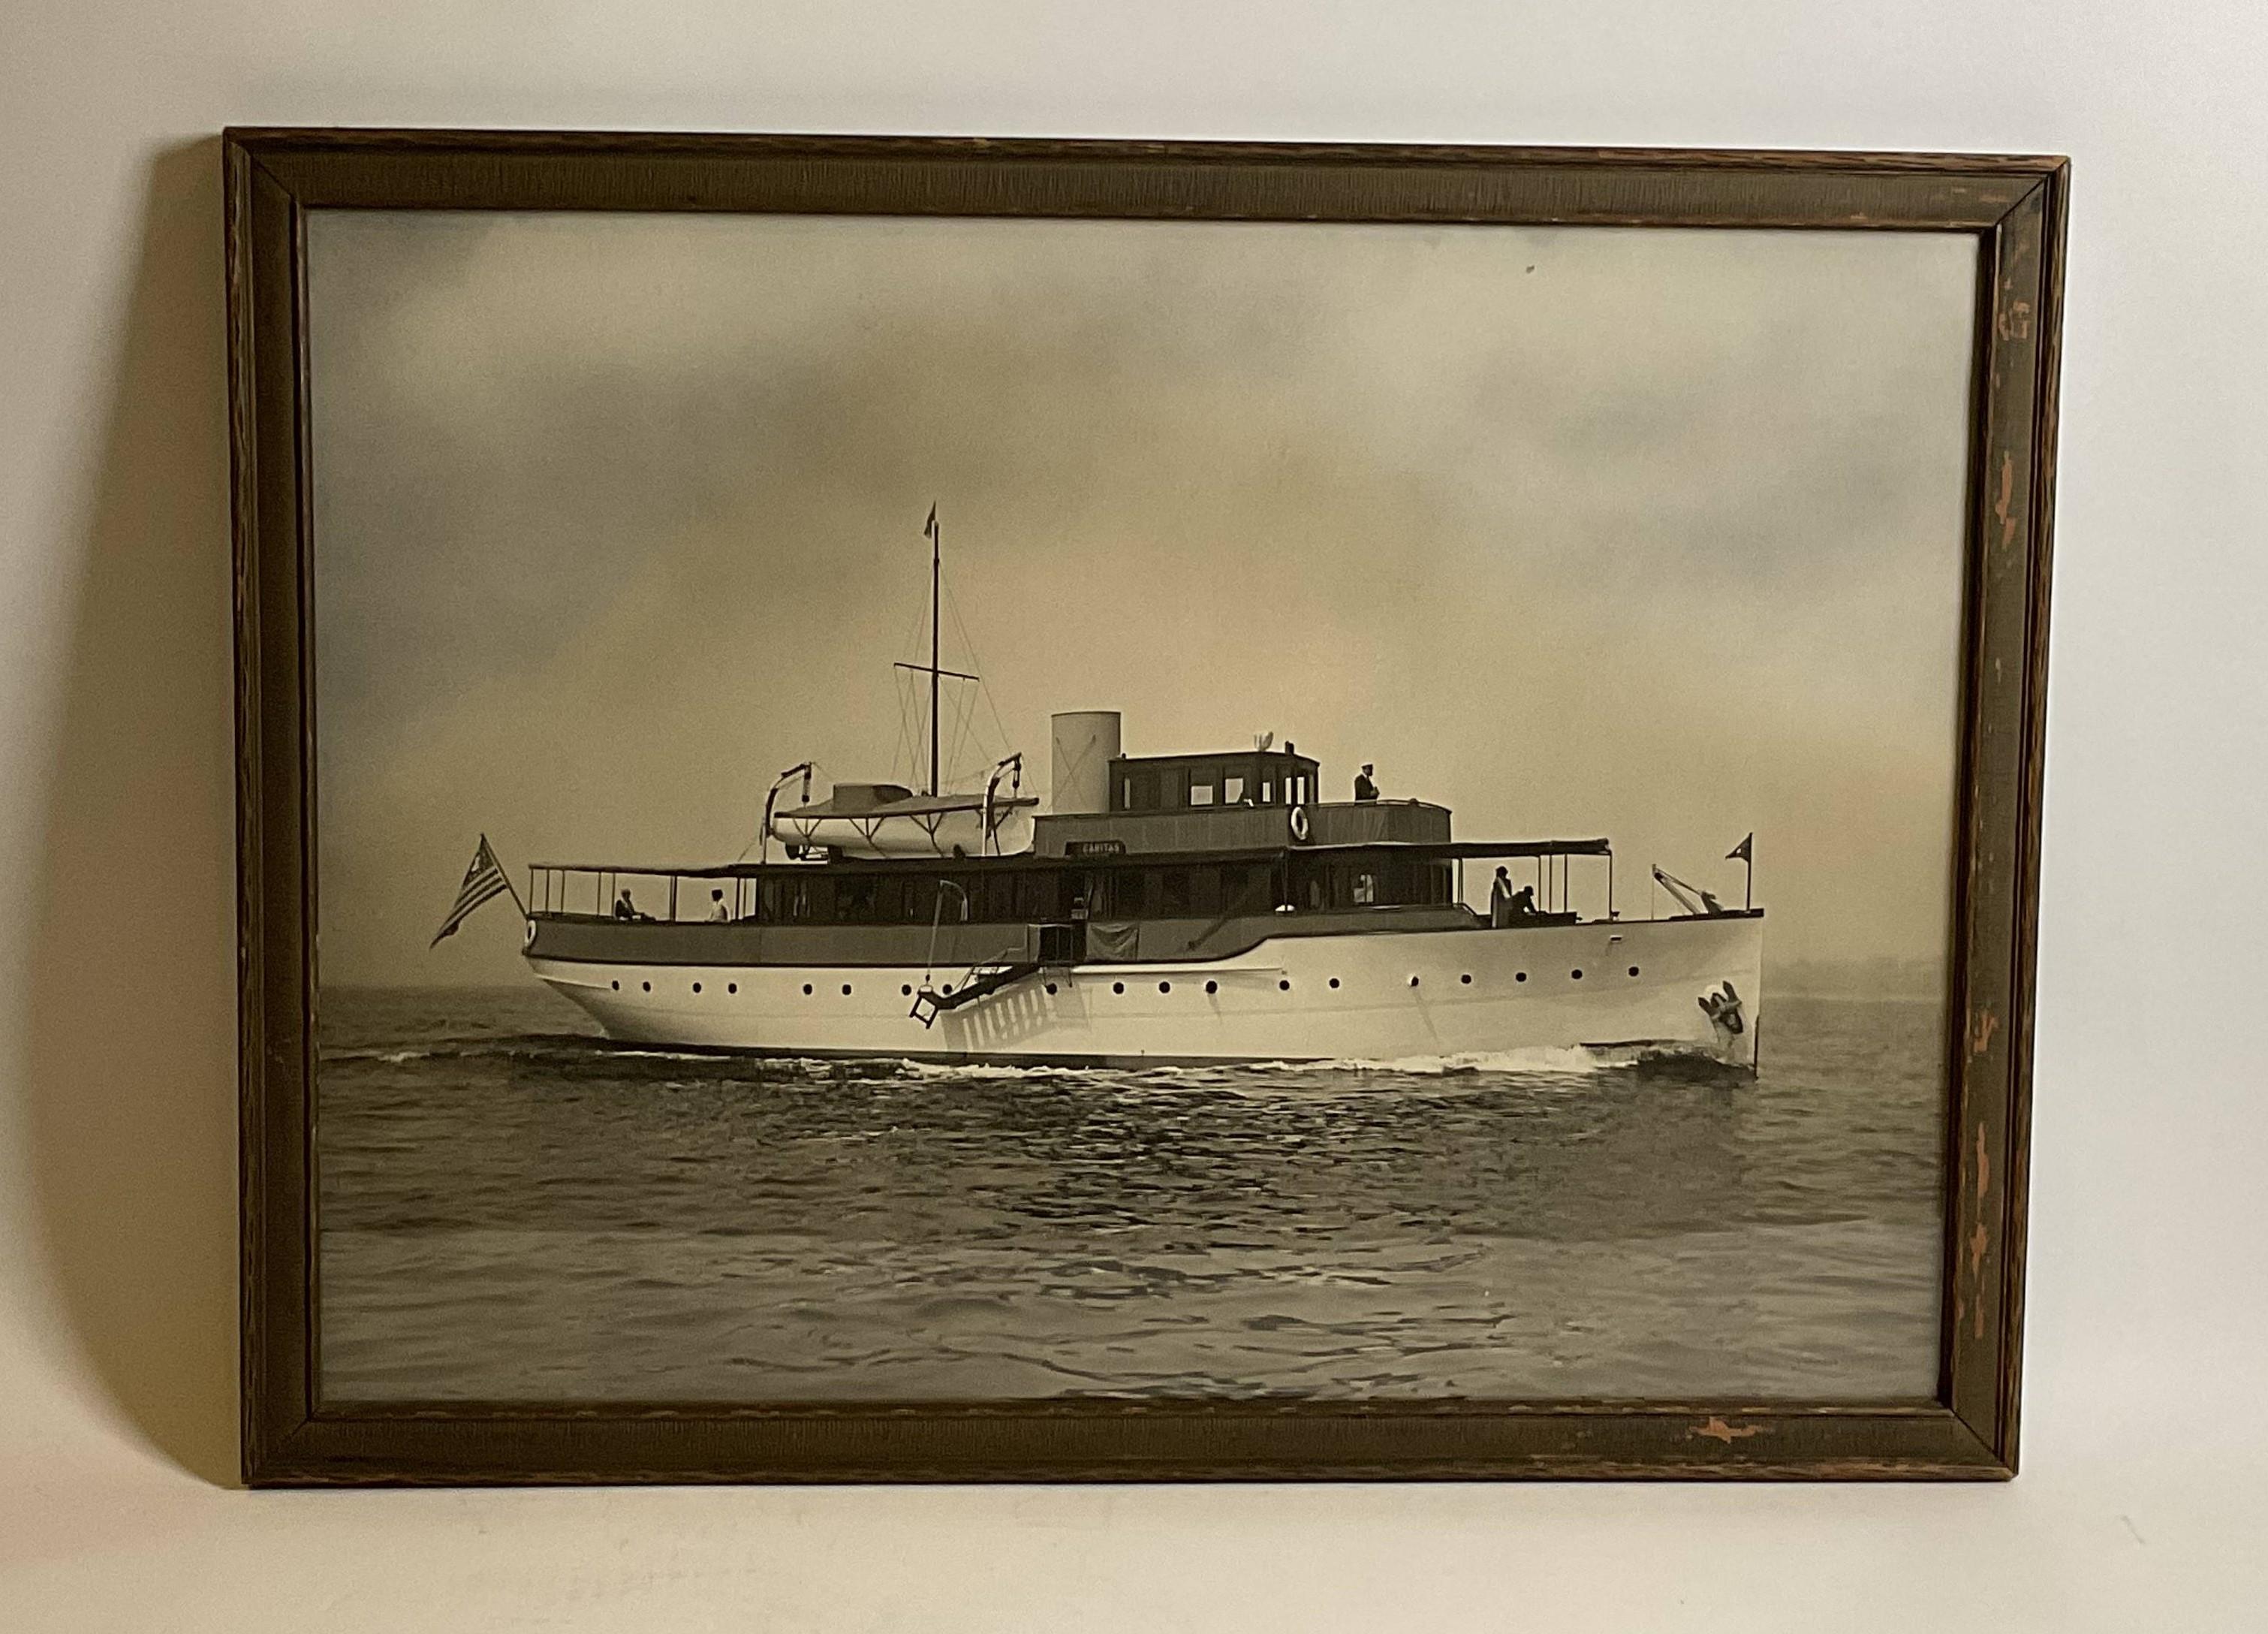 Early twentieth century photo by Edwin Levick of the Lawley Built Yacht “Caritas”. Caritas was a 112 foot private power yacht constructed at George Lawley and Son, Neponset Mass. Homeport was Caritas Island in Bridgeport Connecticut. She was built